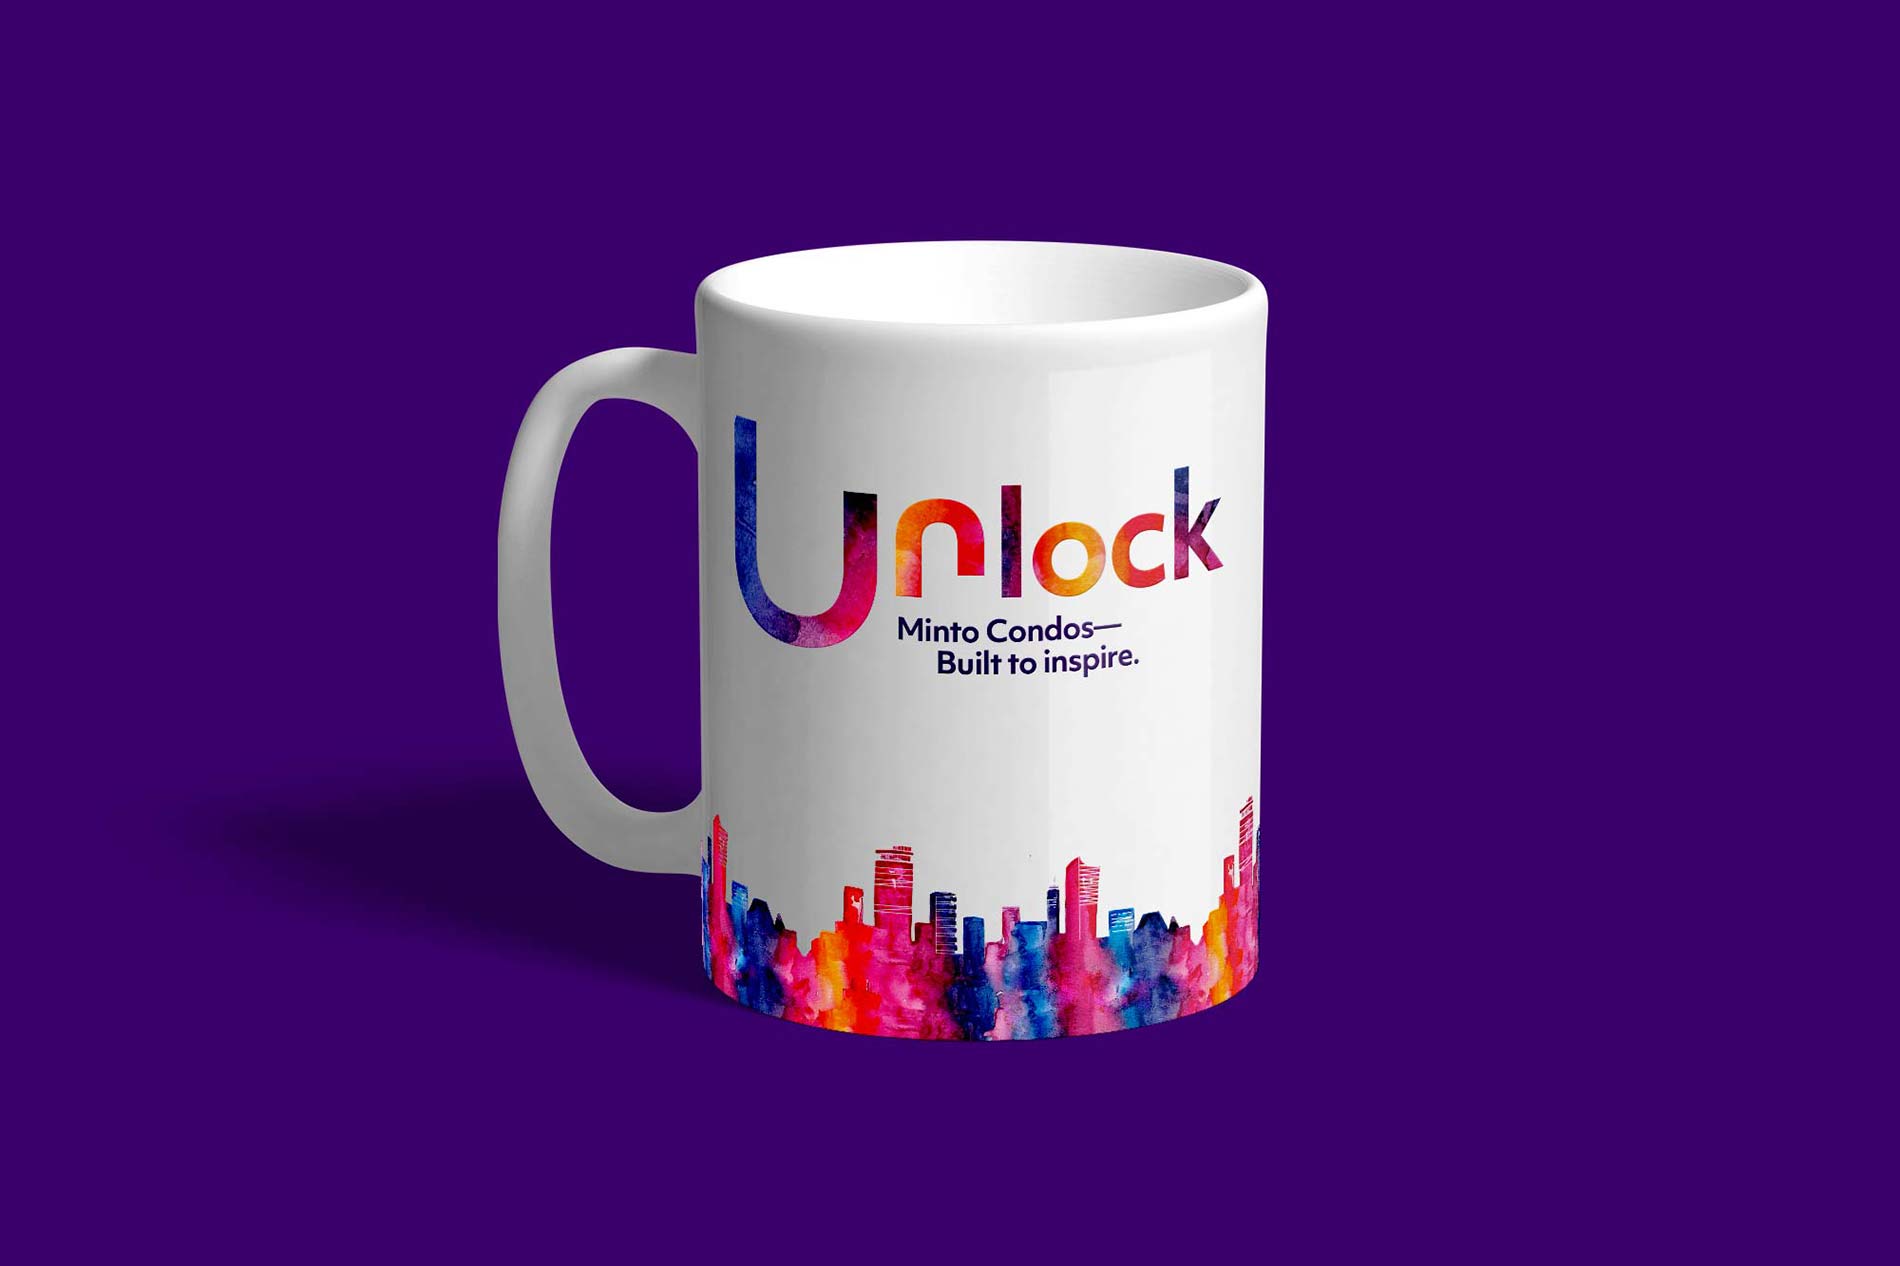 An image of a mug with campaign design on it